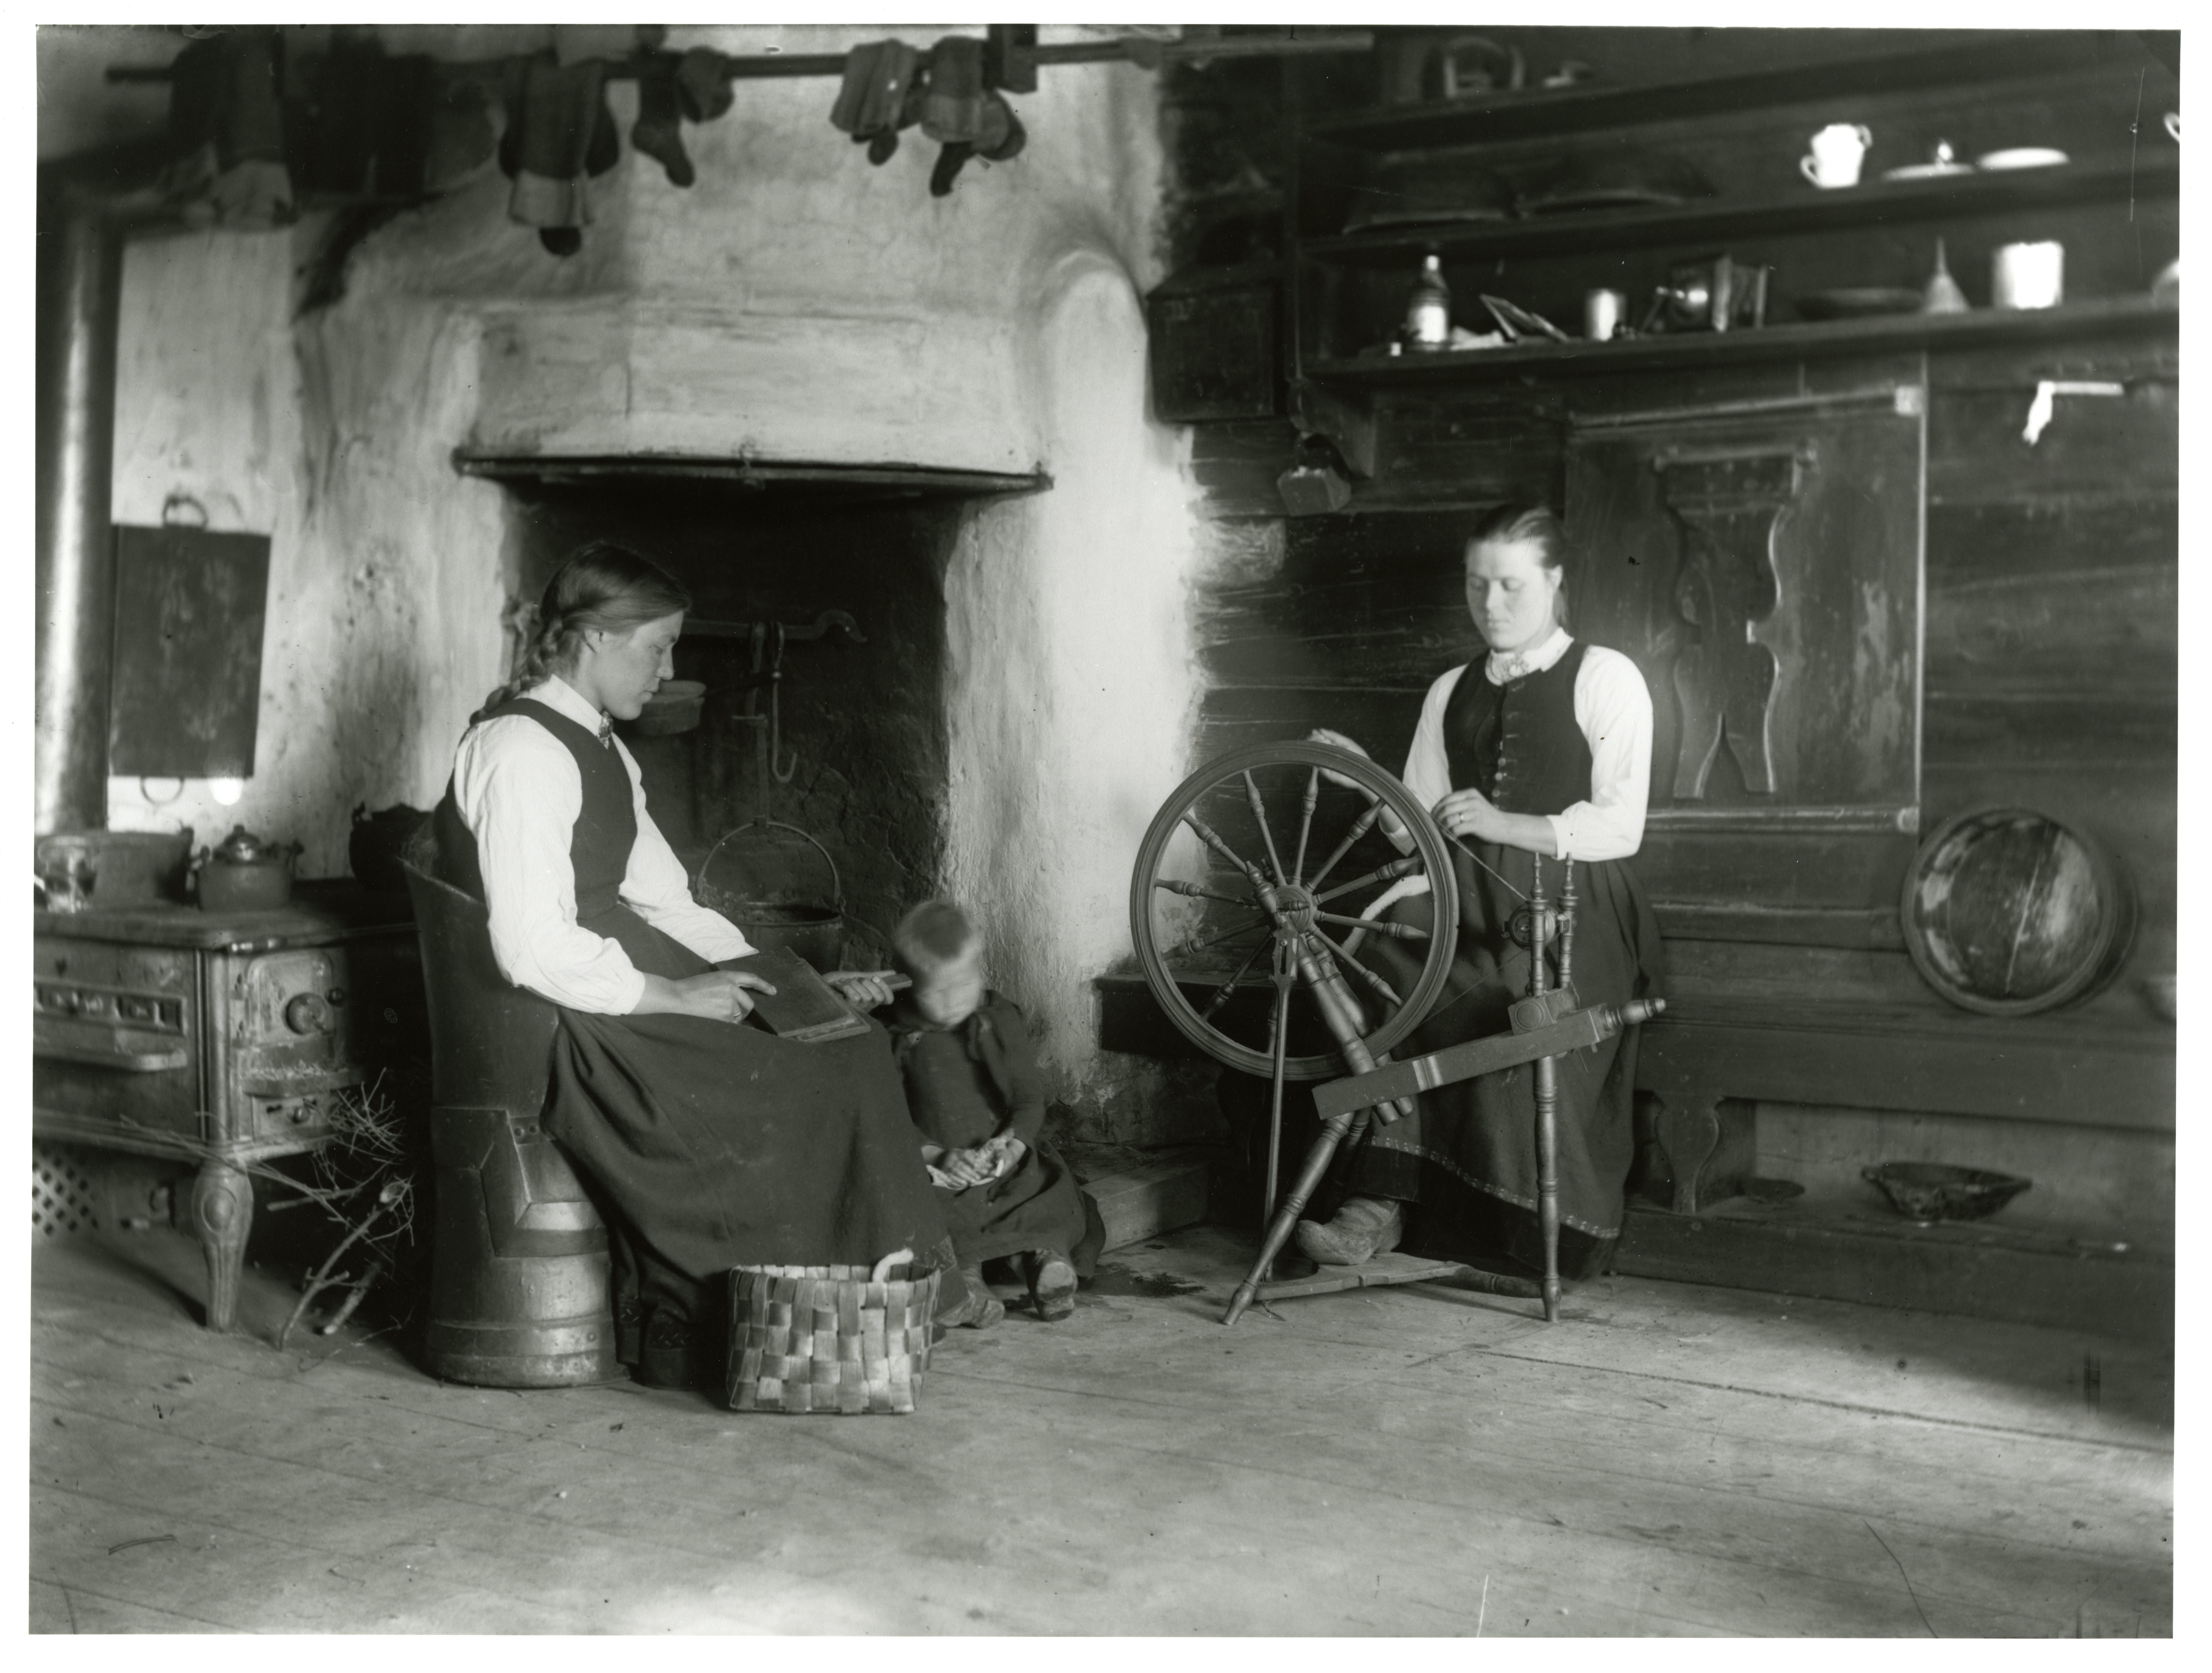 Two women and child inside working.